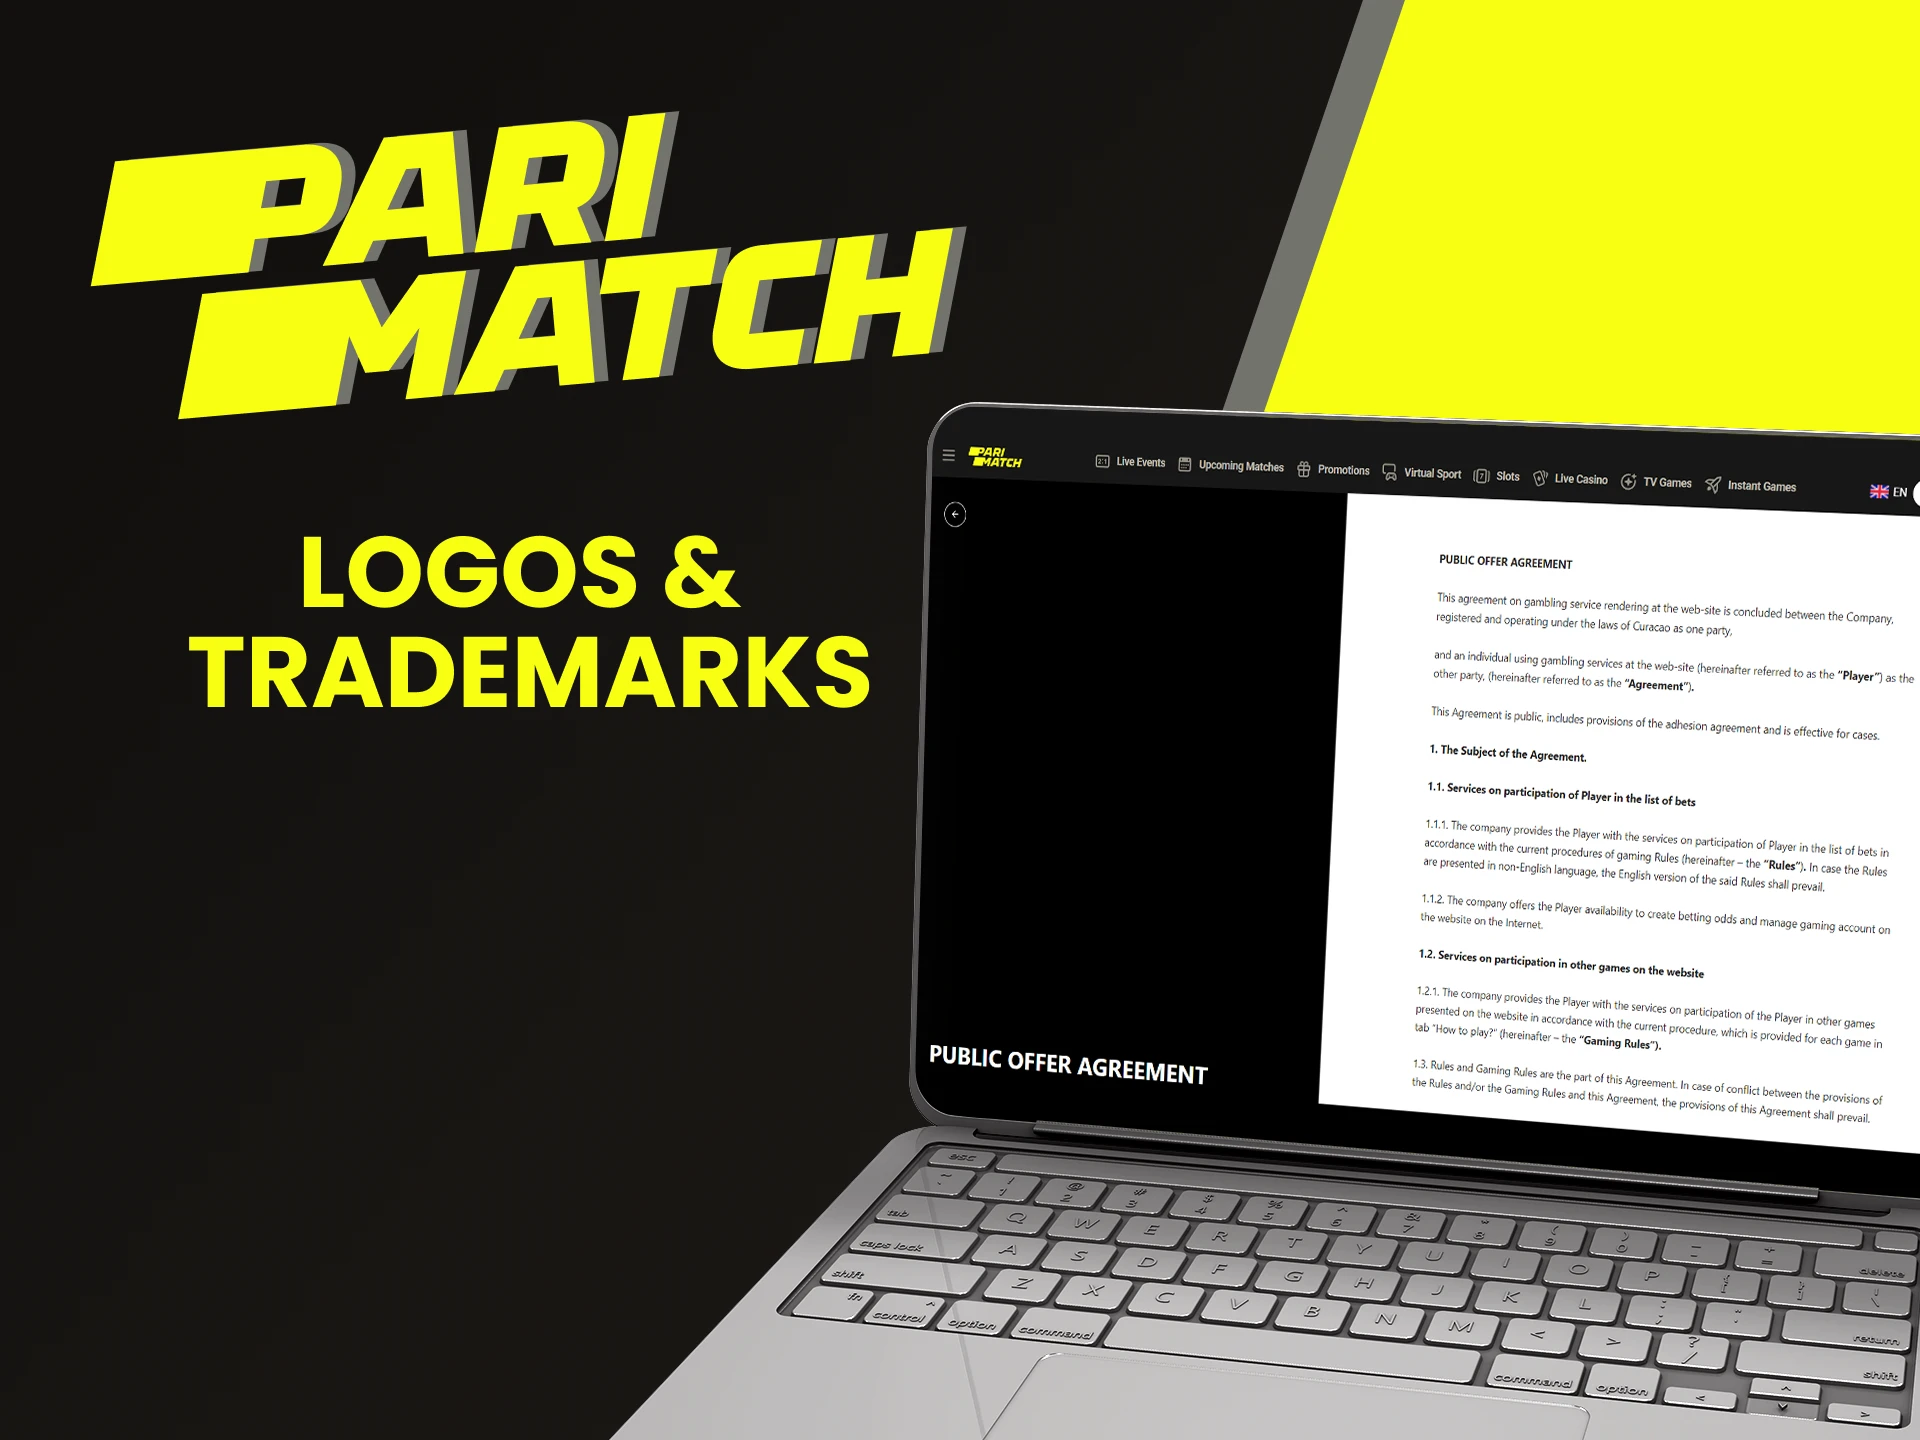 We will tell you who owns the trademarks and intellectual property on the Parimatch website.